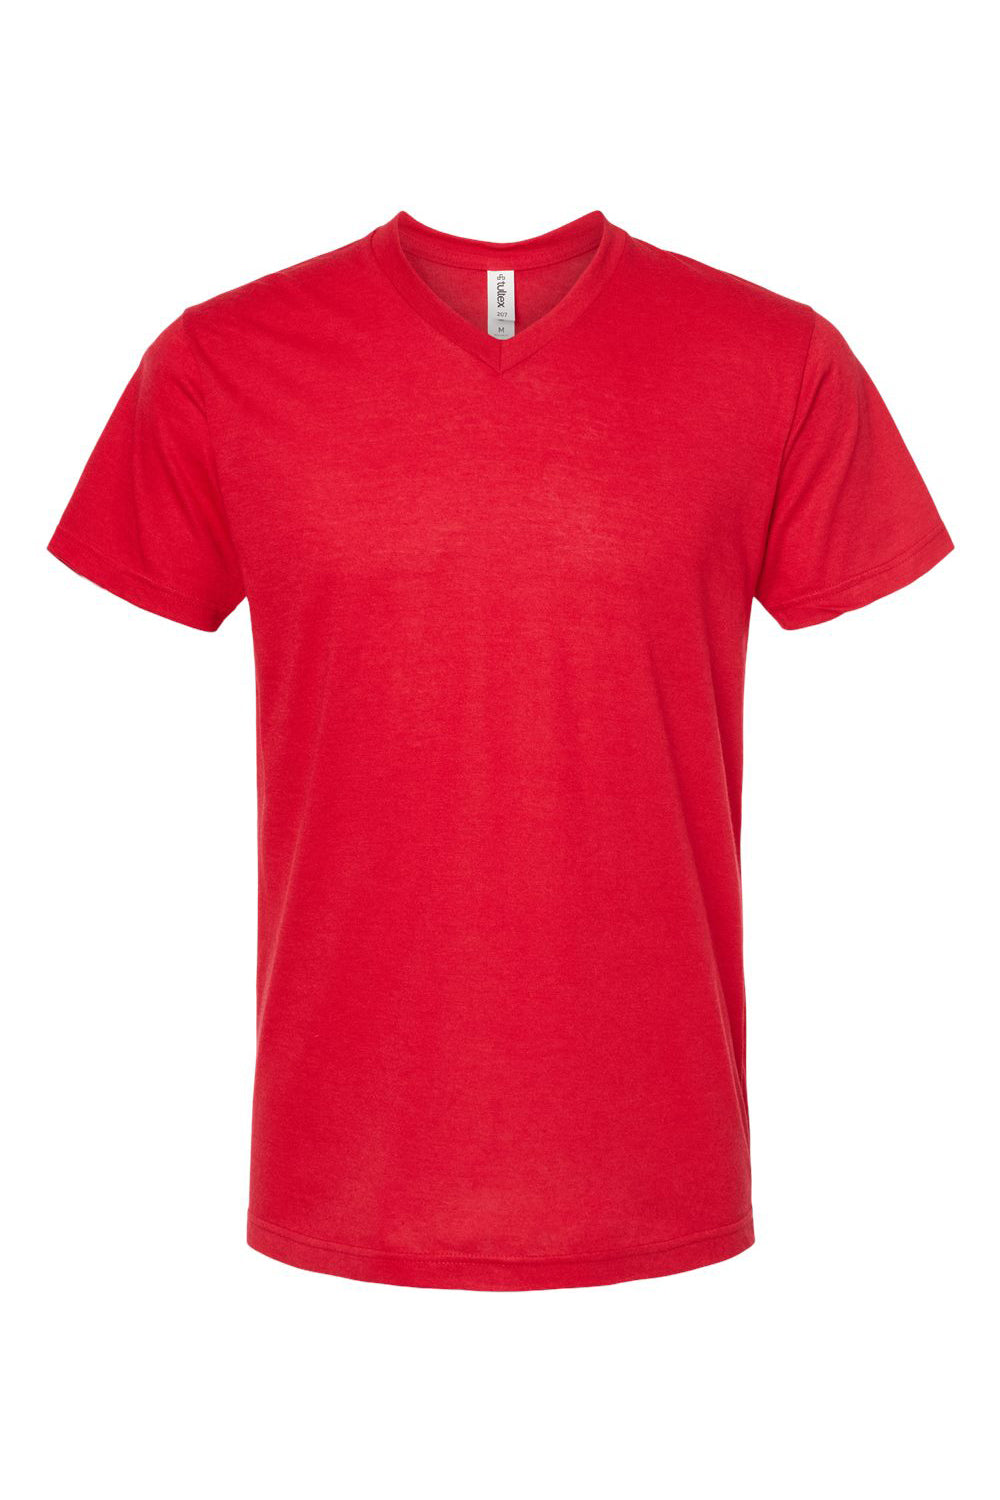 Tultex 207 Mens Poly-Rich Short Sleeve V-Neck T-Shirt Red Flat Front